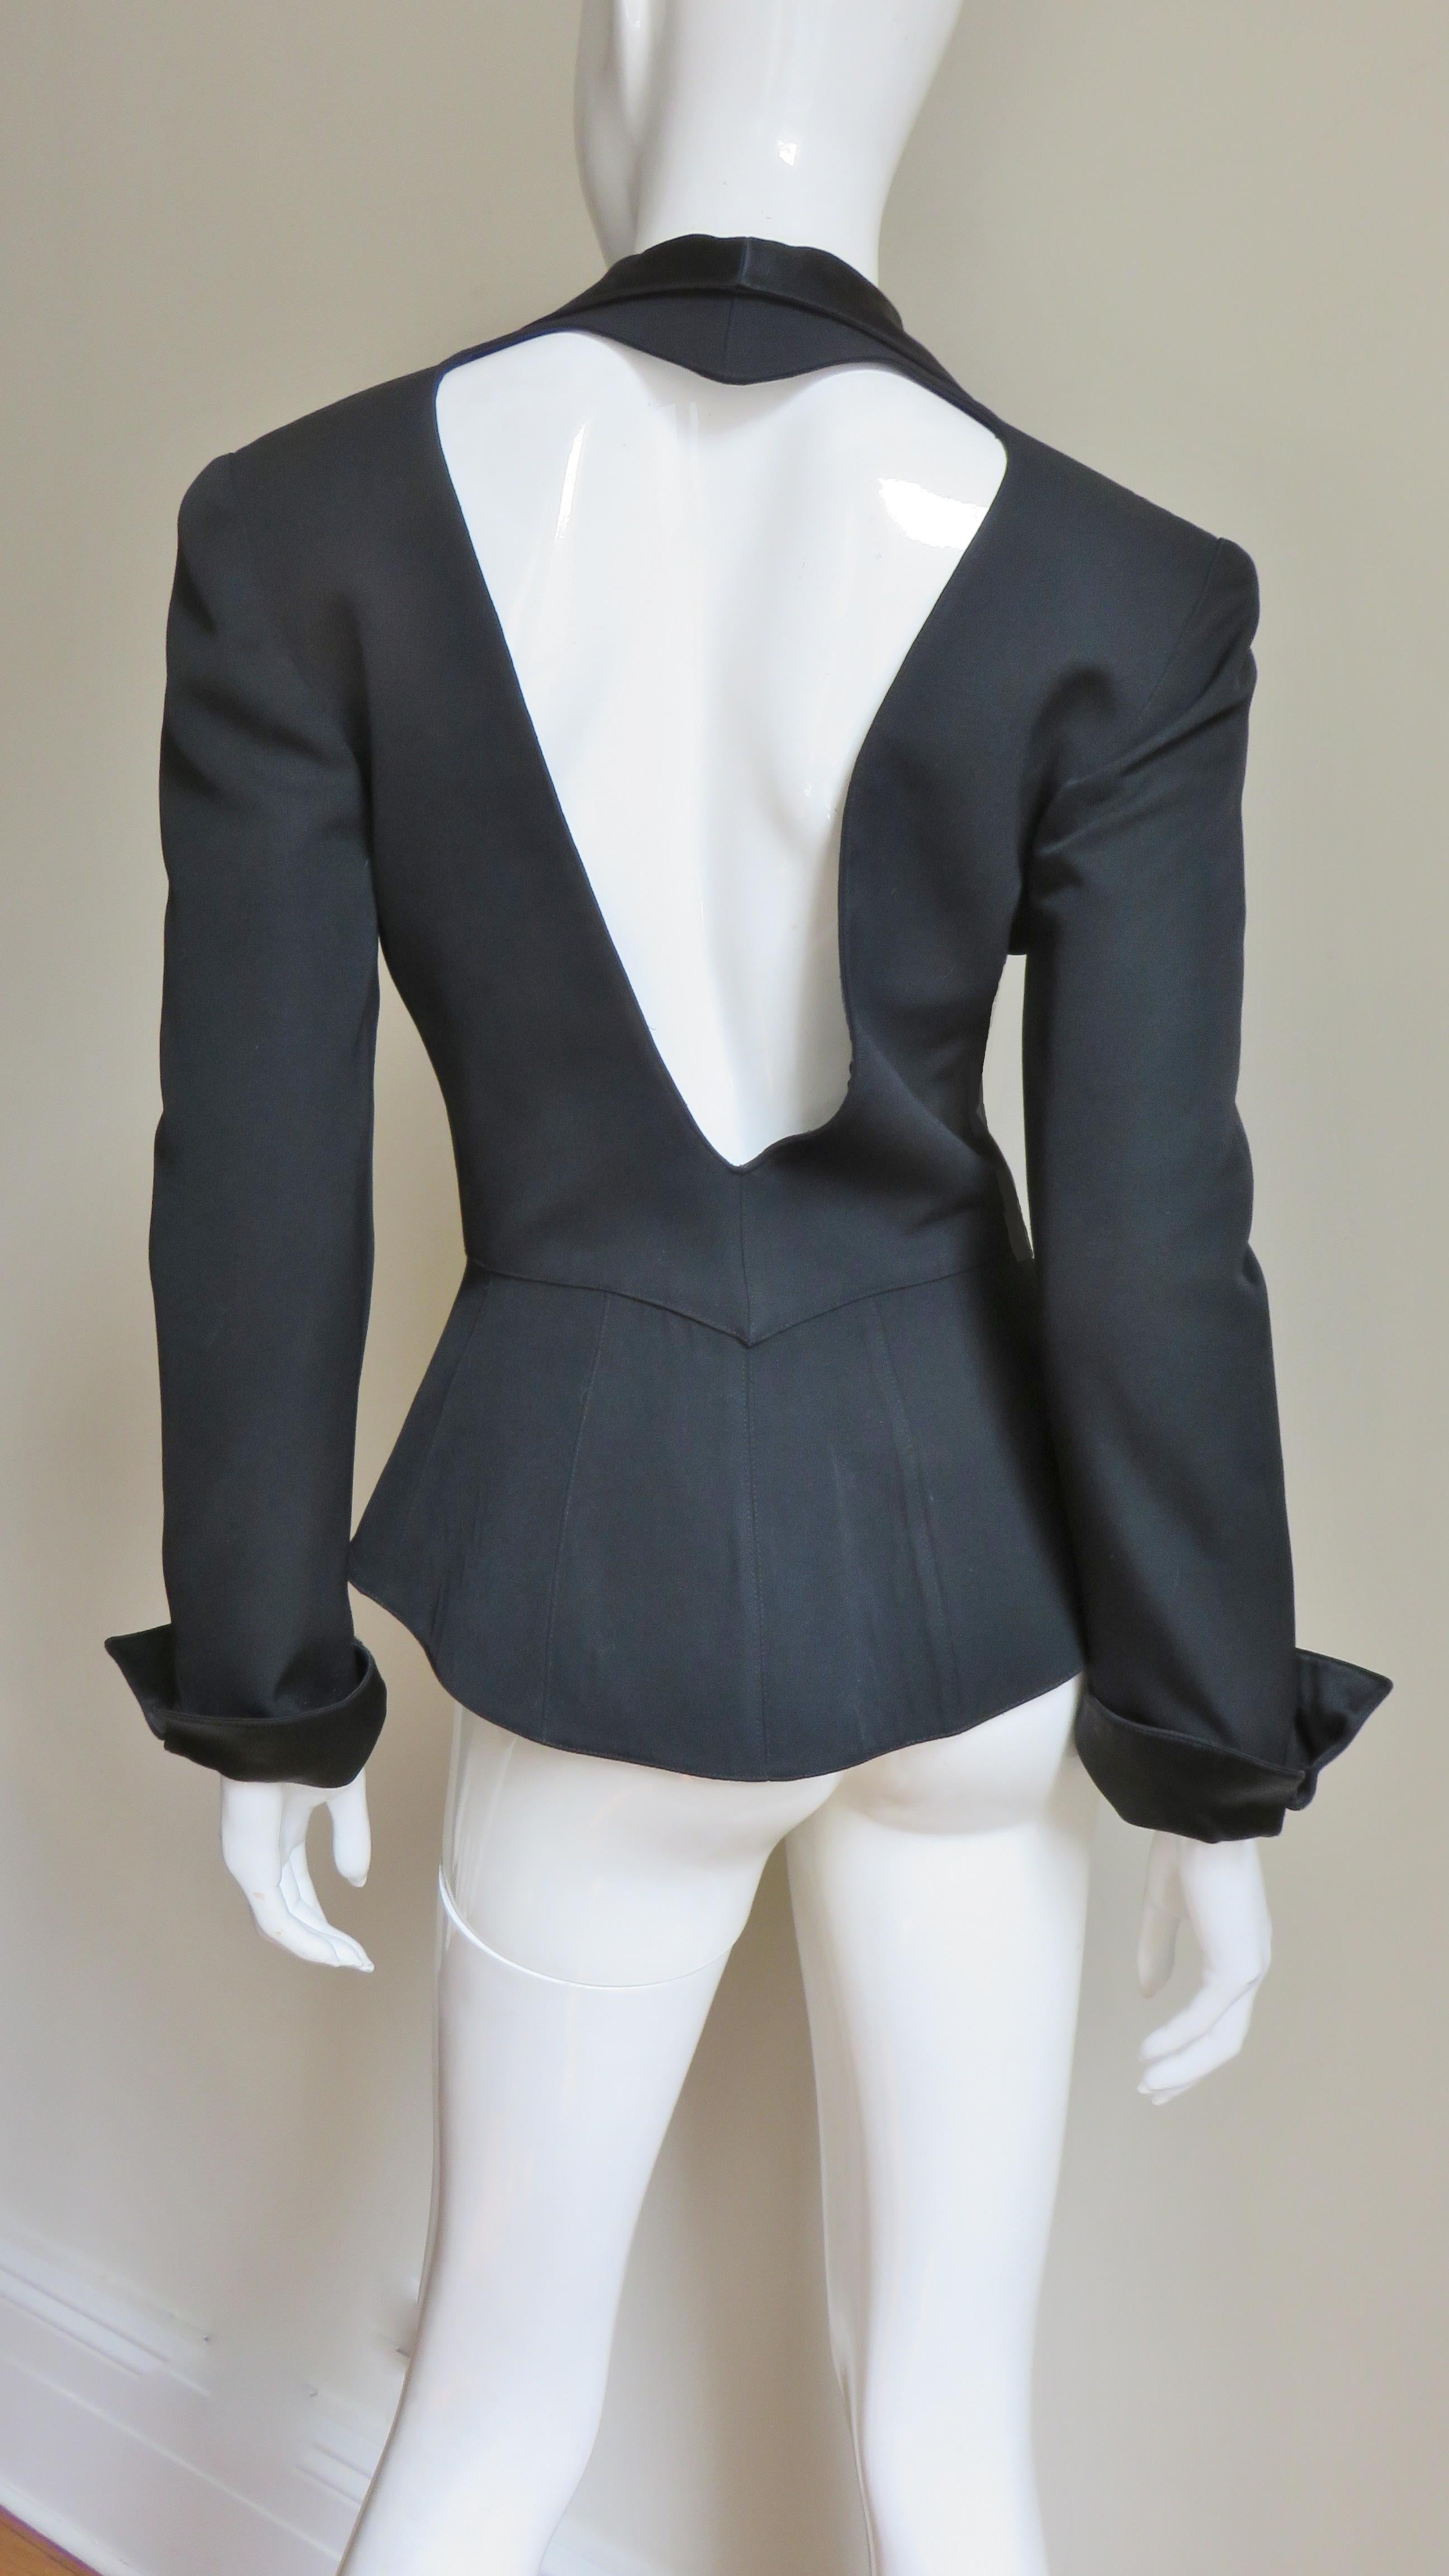 Thierry Mugler Asymmetric Lapel Jacket with Cut out Back 6